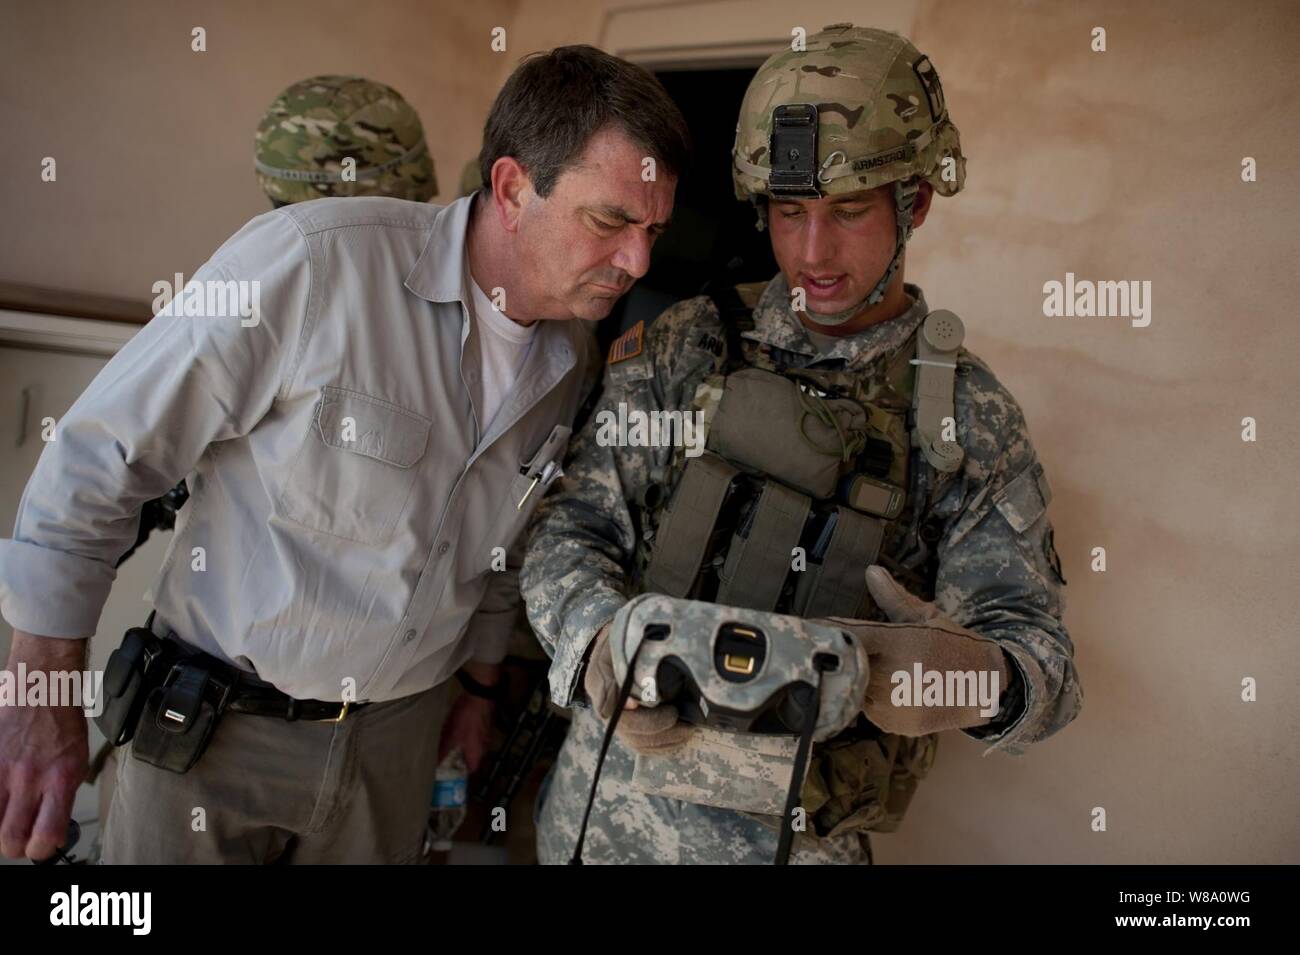 U.S. Army Sgt. Donald Armstrong explains a biometric scanning system to Deputy Secretary of Defense Ashton M. Carter during a counter Improvised Explosive Device training exercise, on Fort Campbell, Ky., on June 20, 2012.  Armstrong is assigned to the 101st Airborne Division. Stock Photo